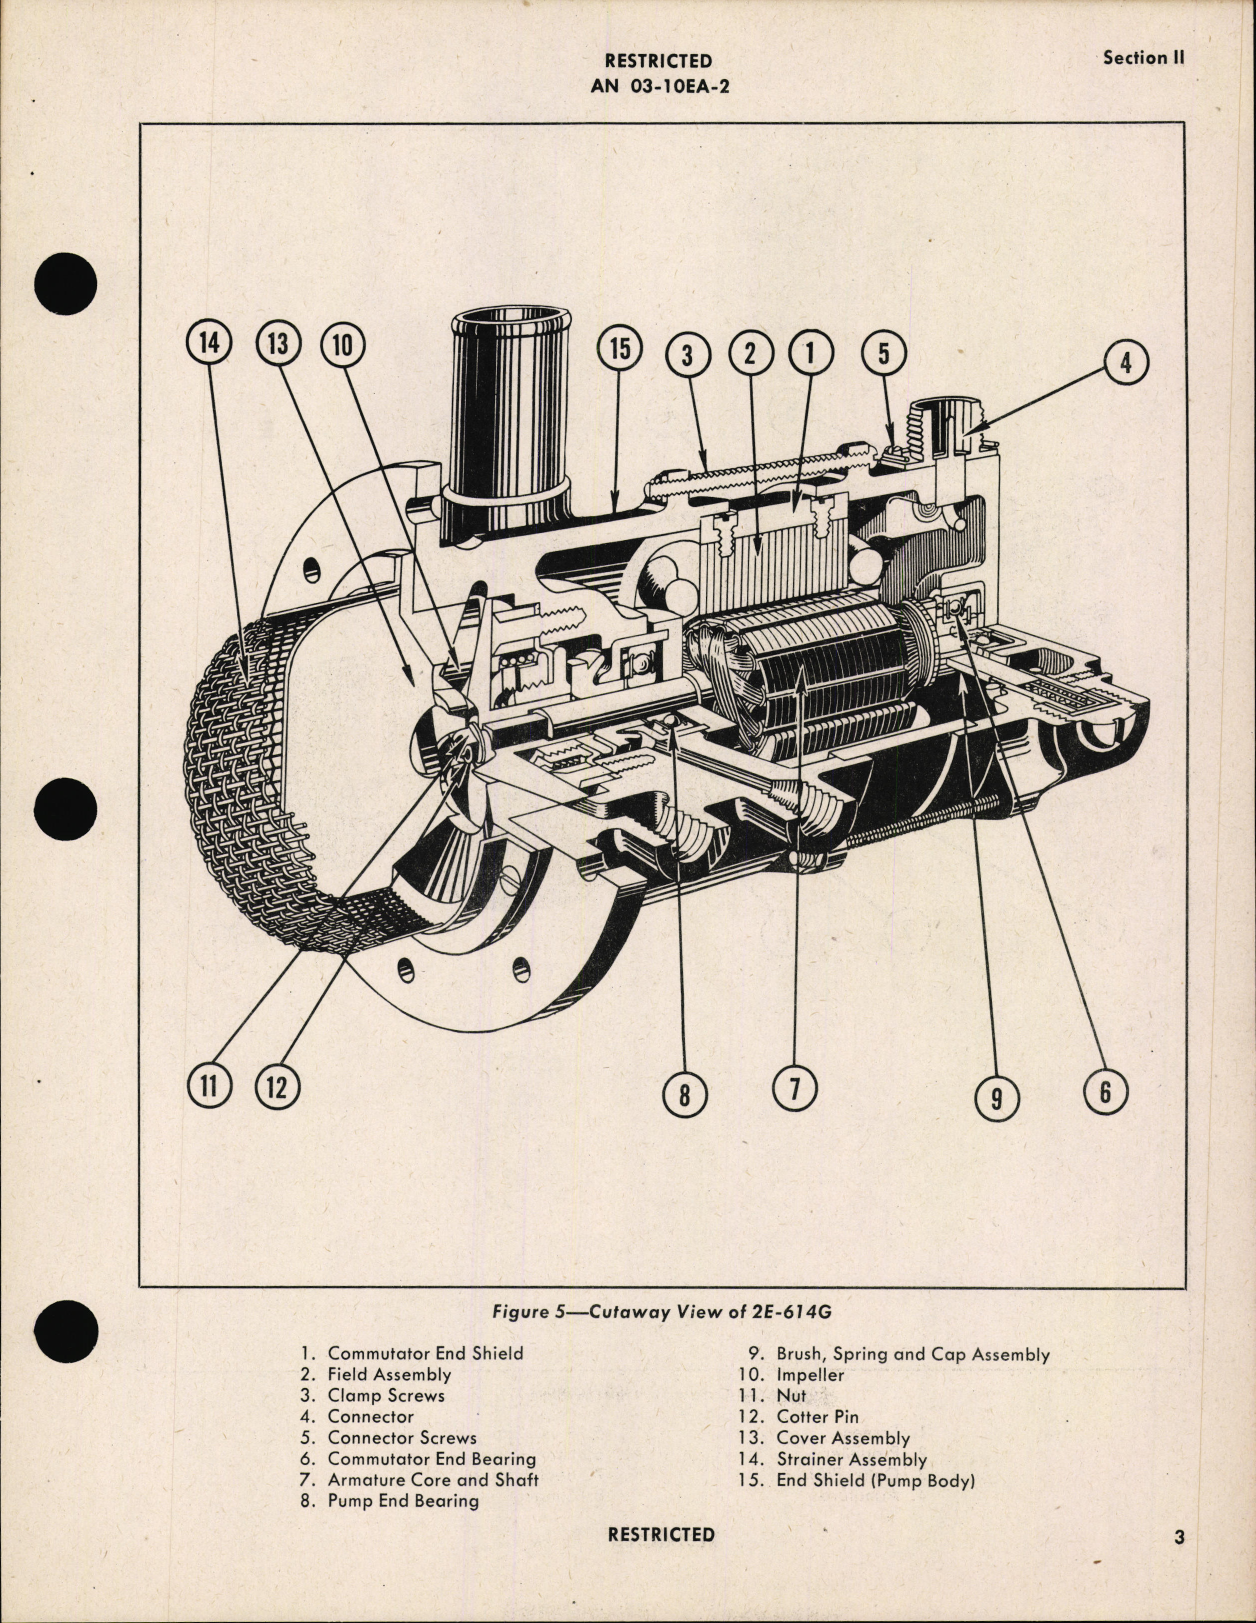 Sample page 7 from AirCorps Library document: Operation, Service, & Overhaul Instructions with Parts Catalog for Fuel Booster Pumps